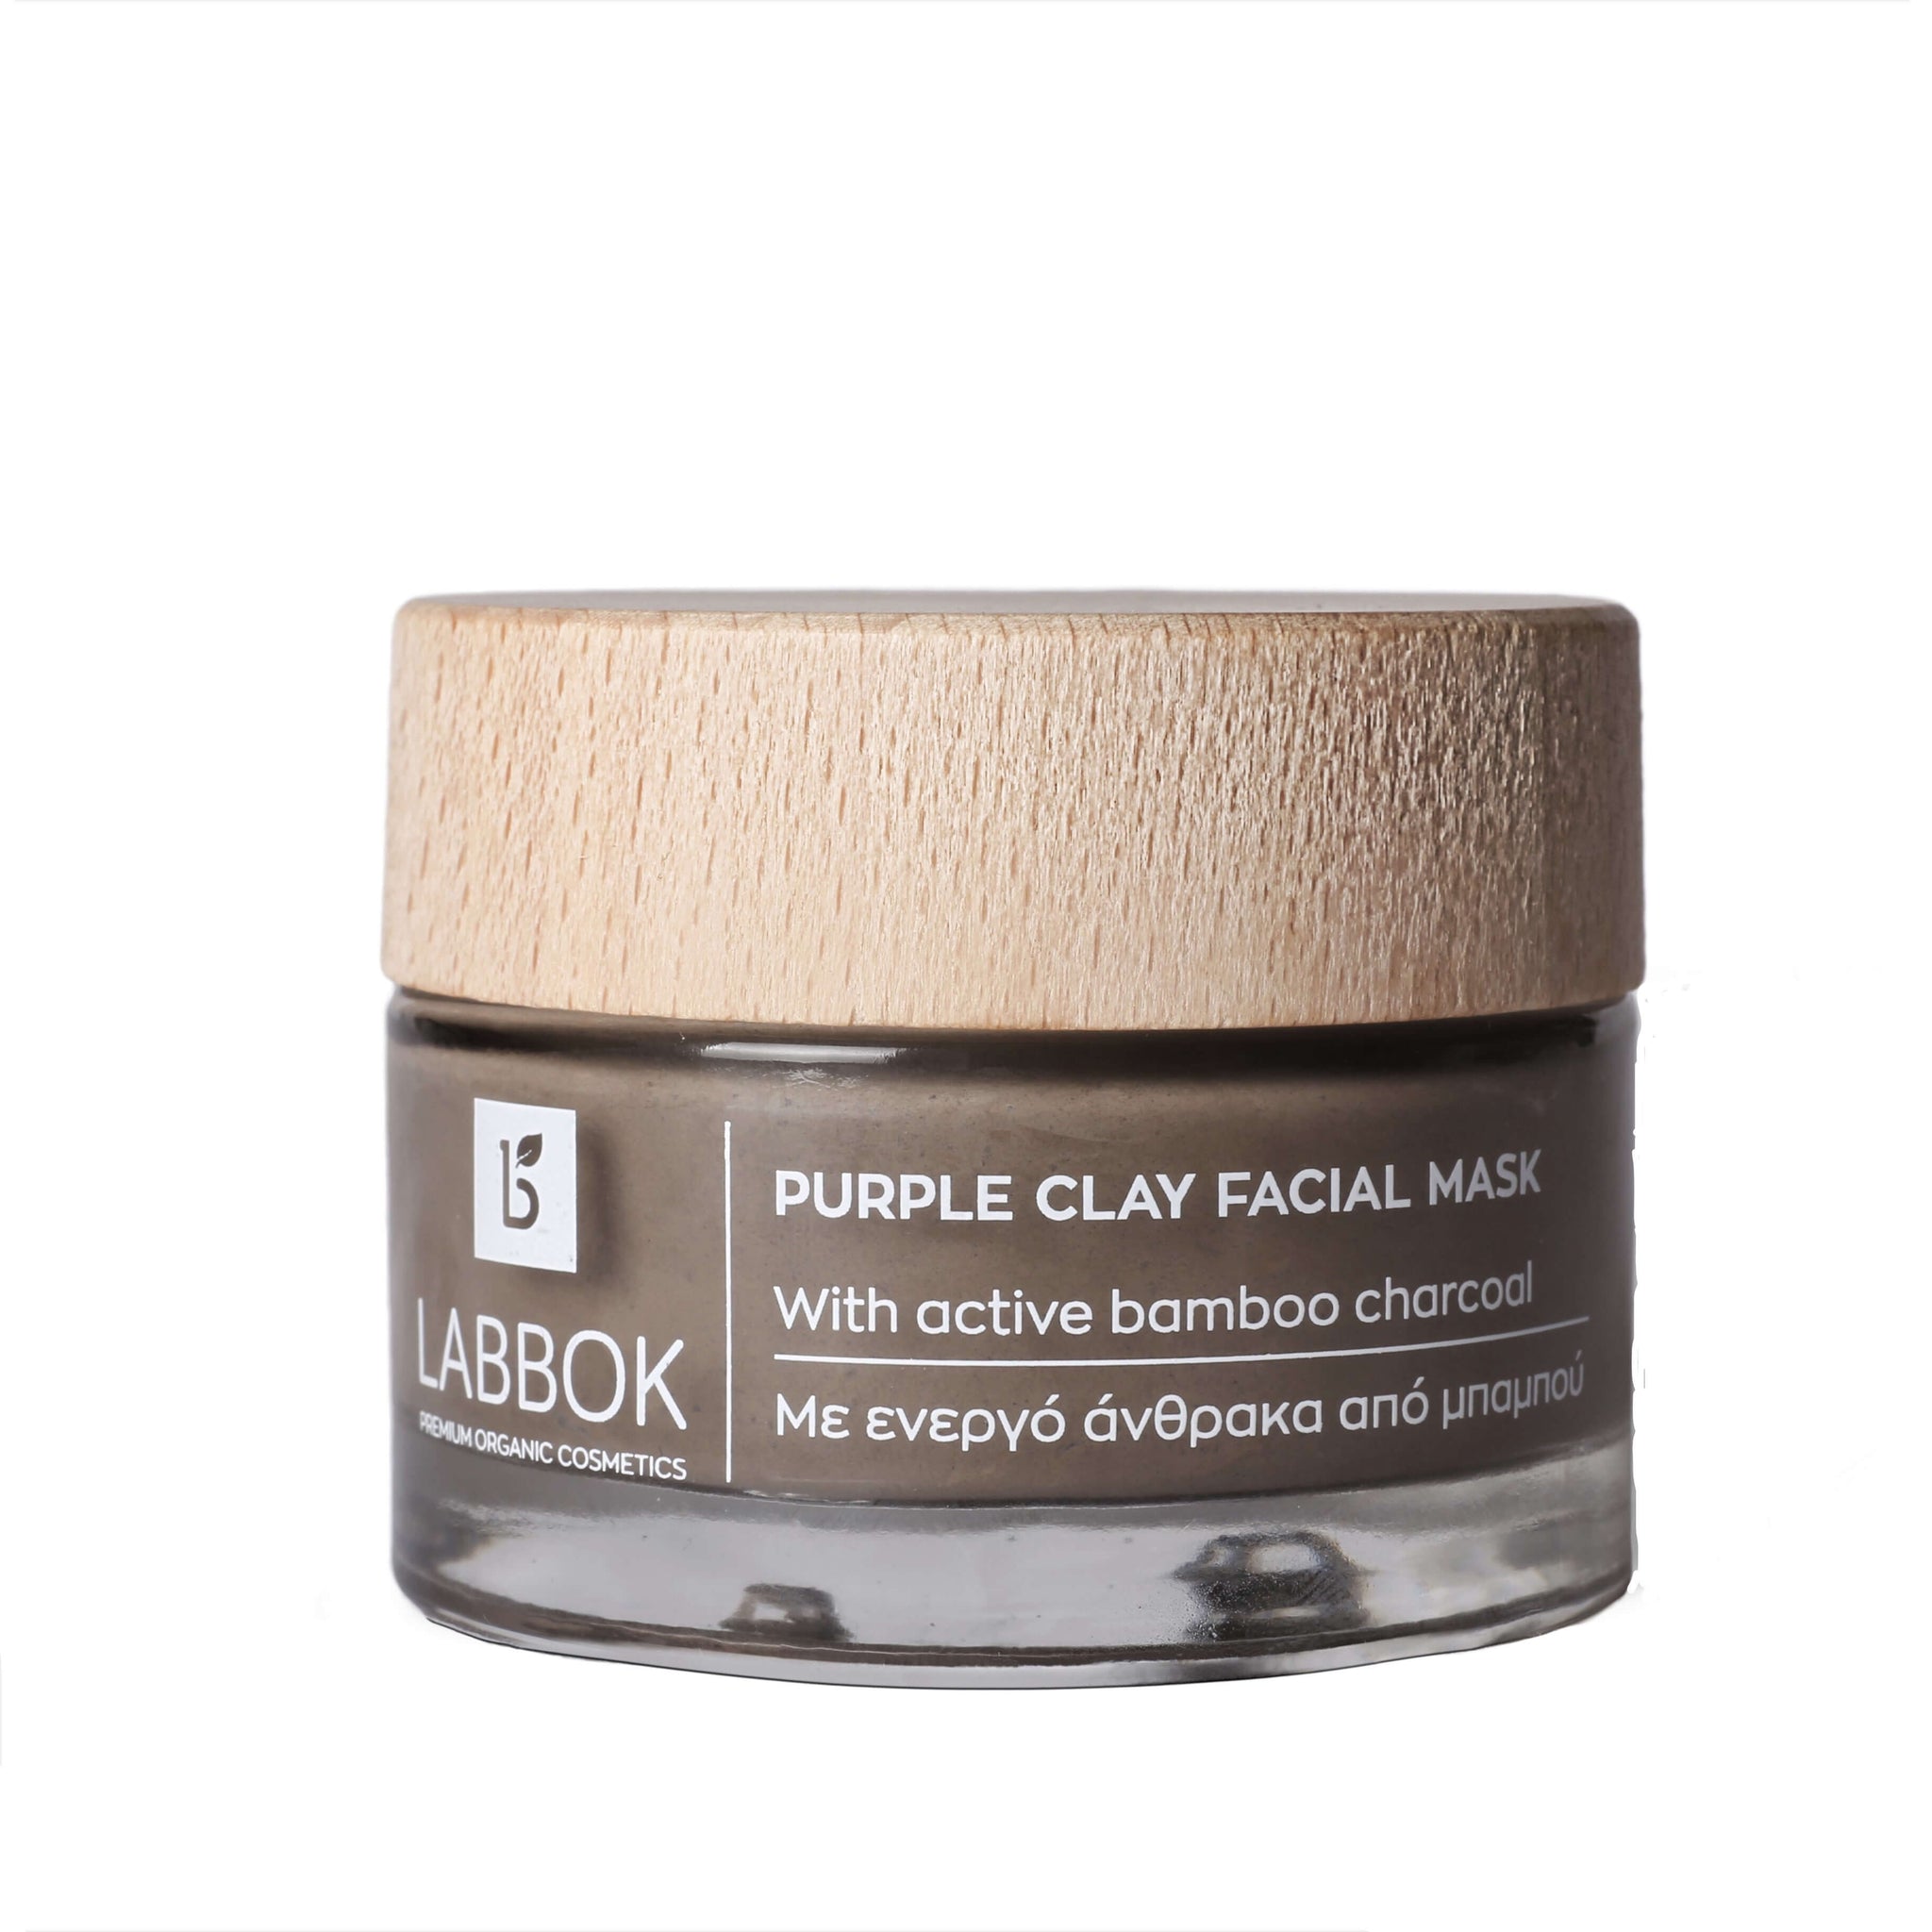 Labbok 2 in 1 Purple Clay Detox and Exfoliation Face Mask, 50 ml